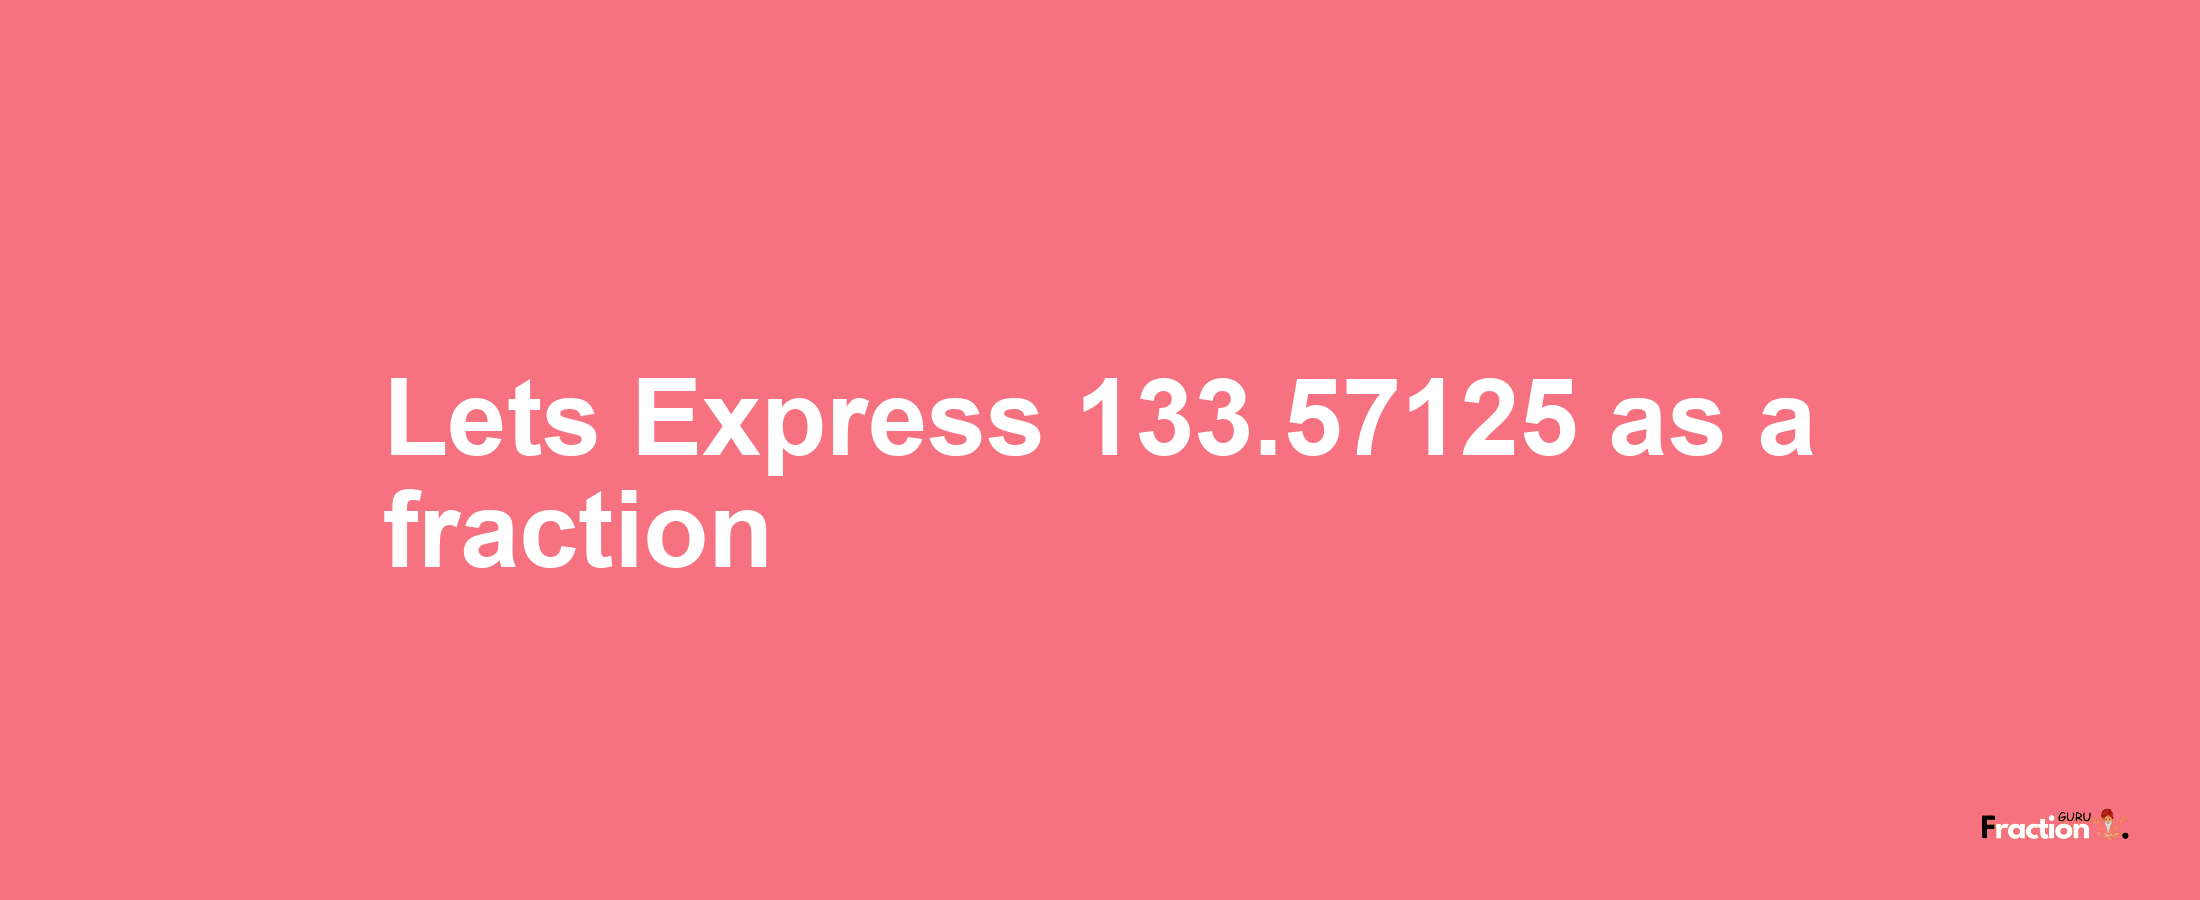 Lets Express 133.57125 as afraction